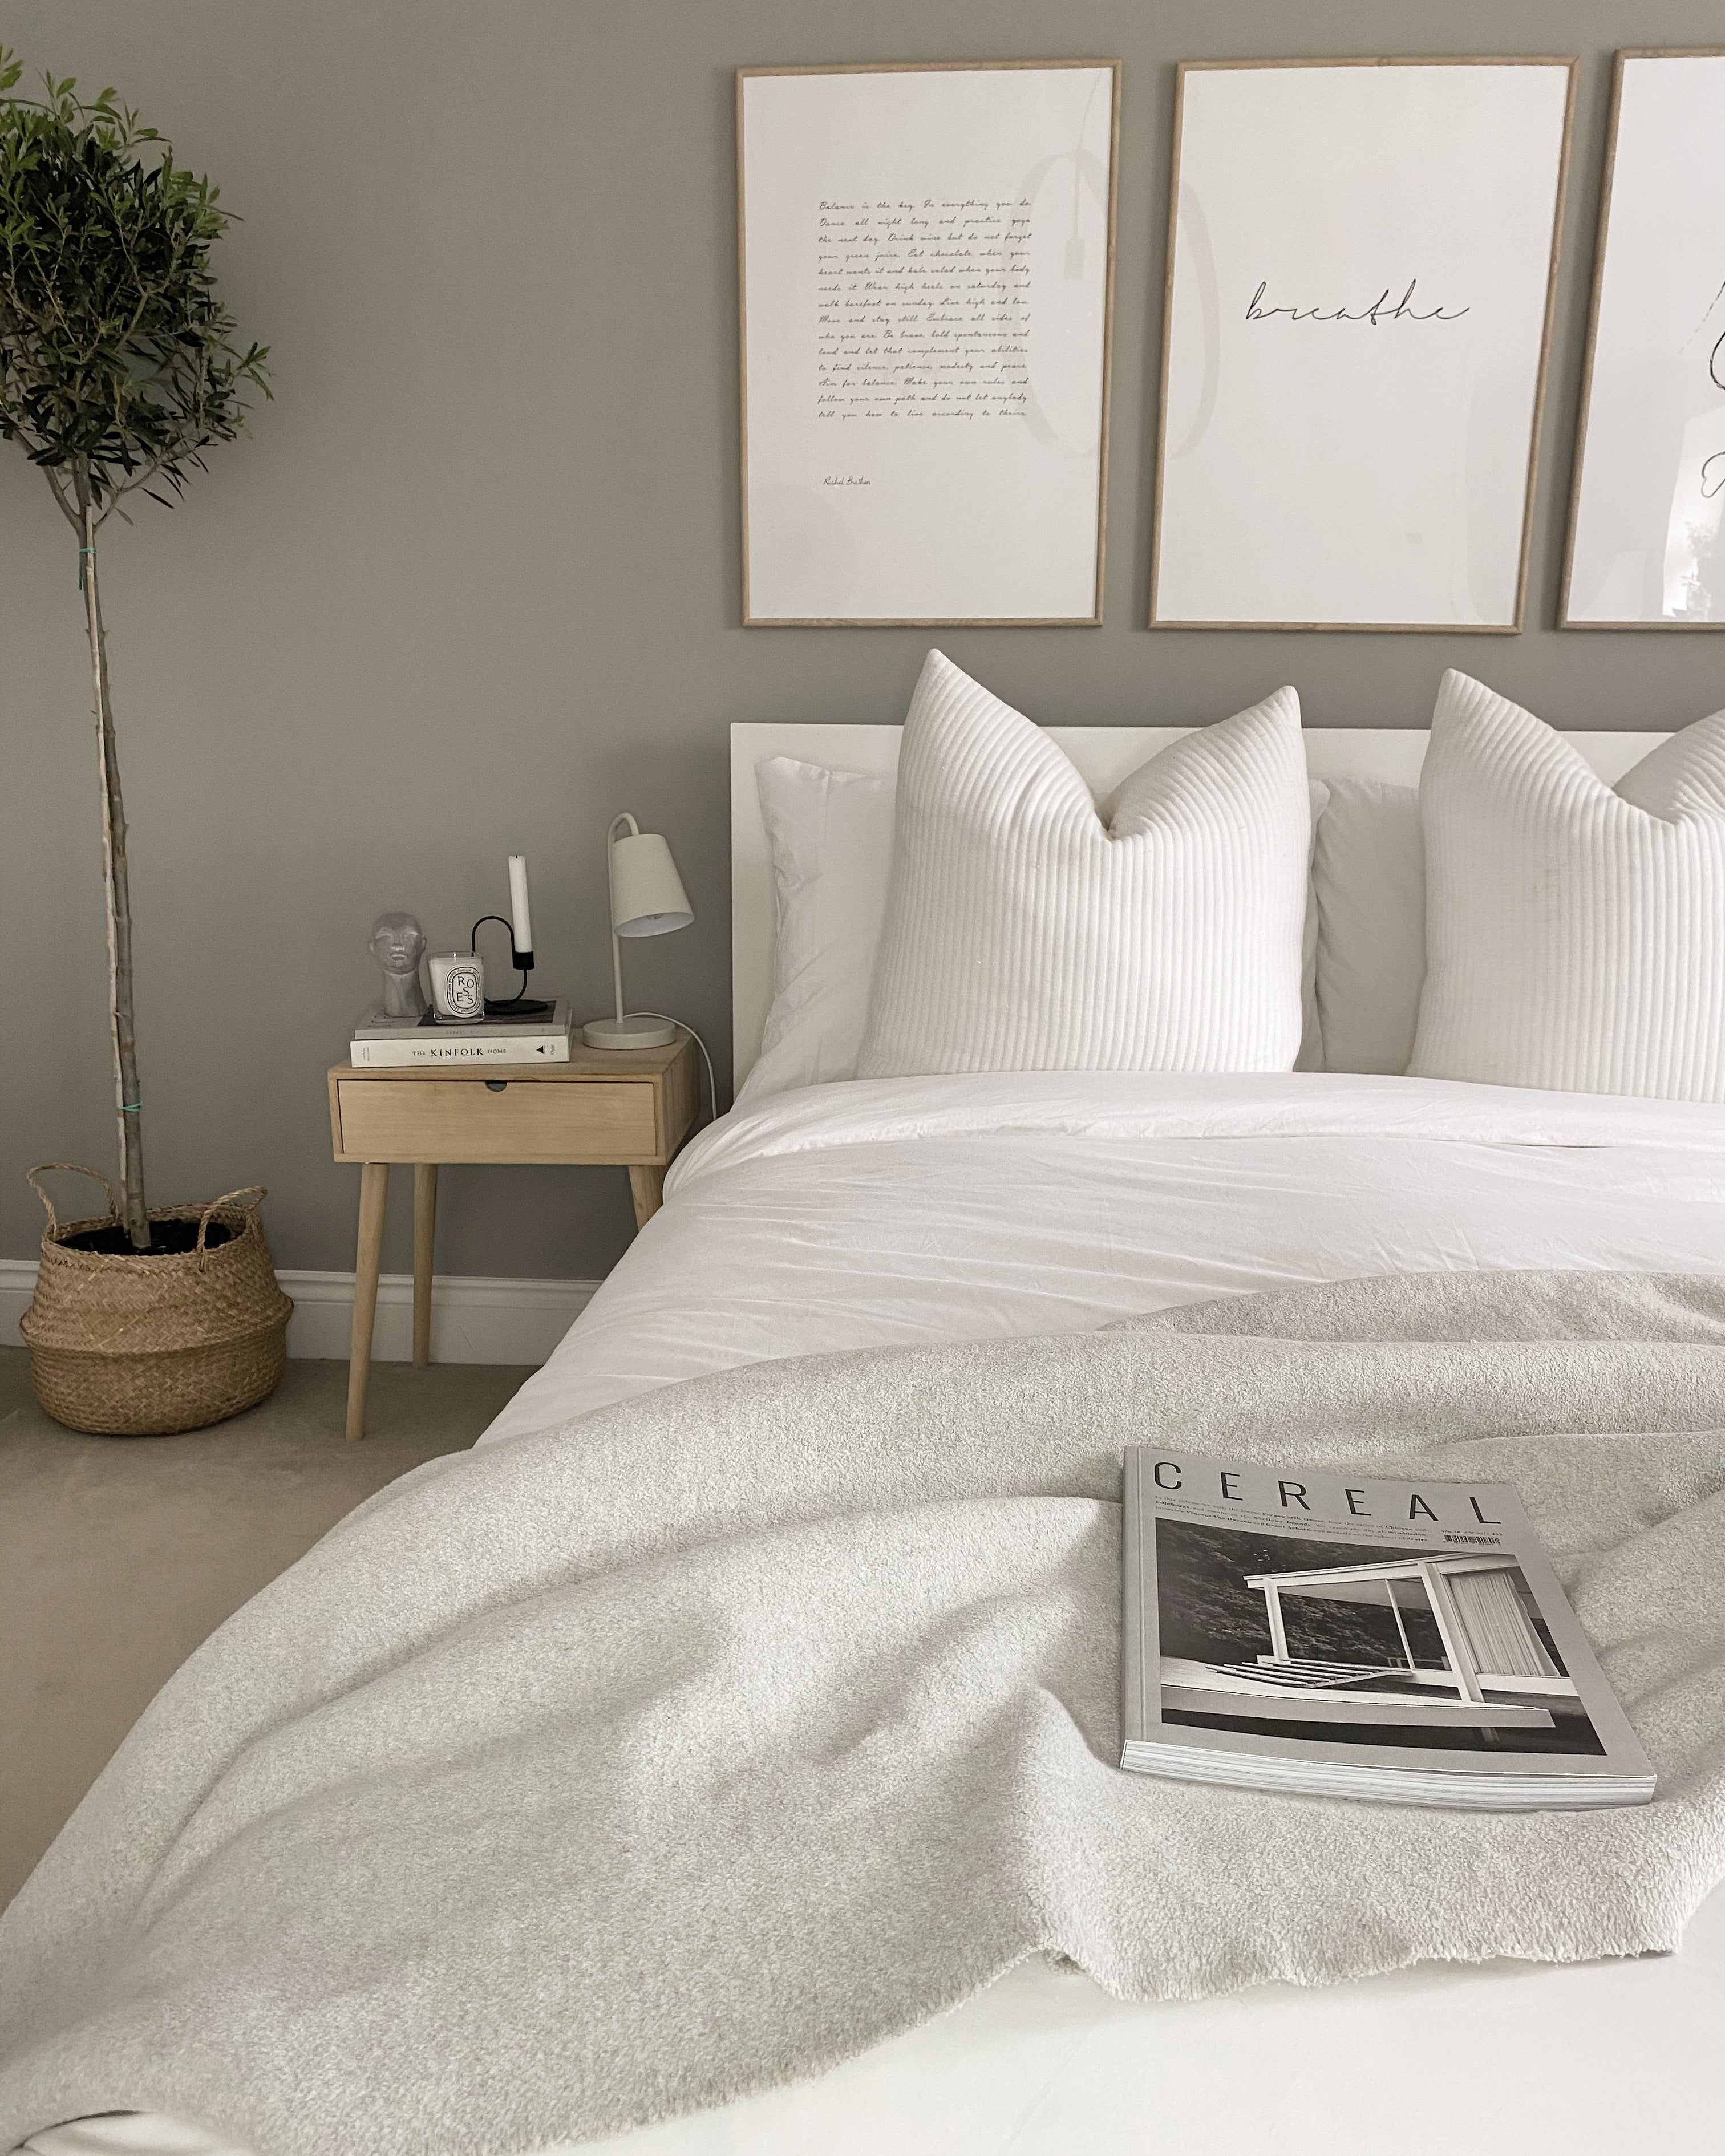 How to Style Neutrals: 3 Tips to Make a Beautiful Bed